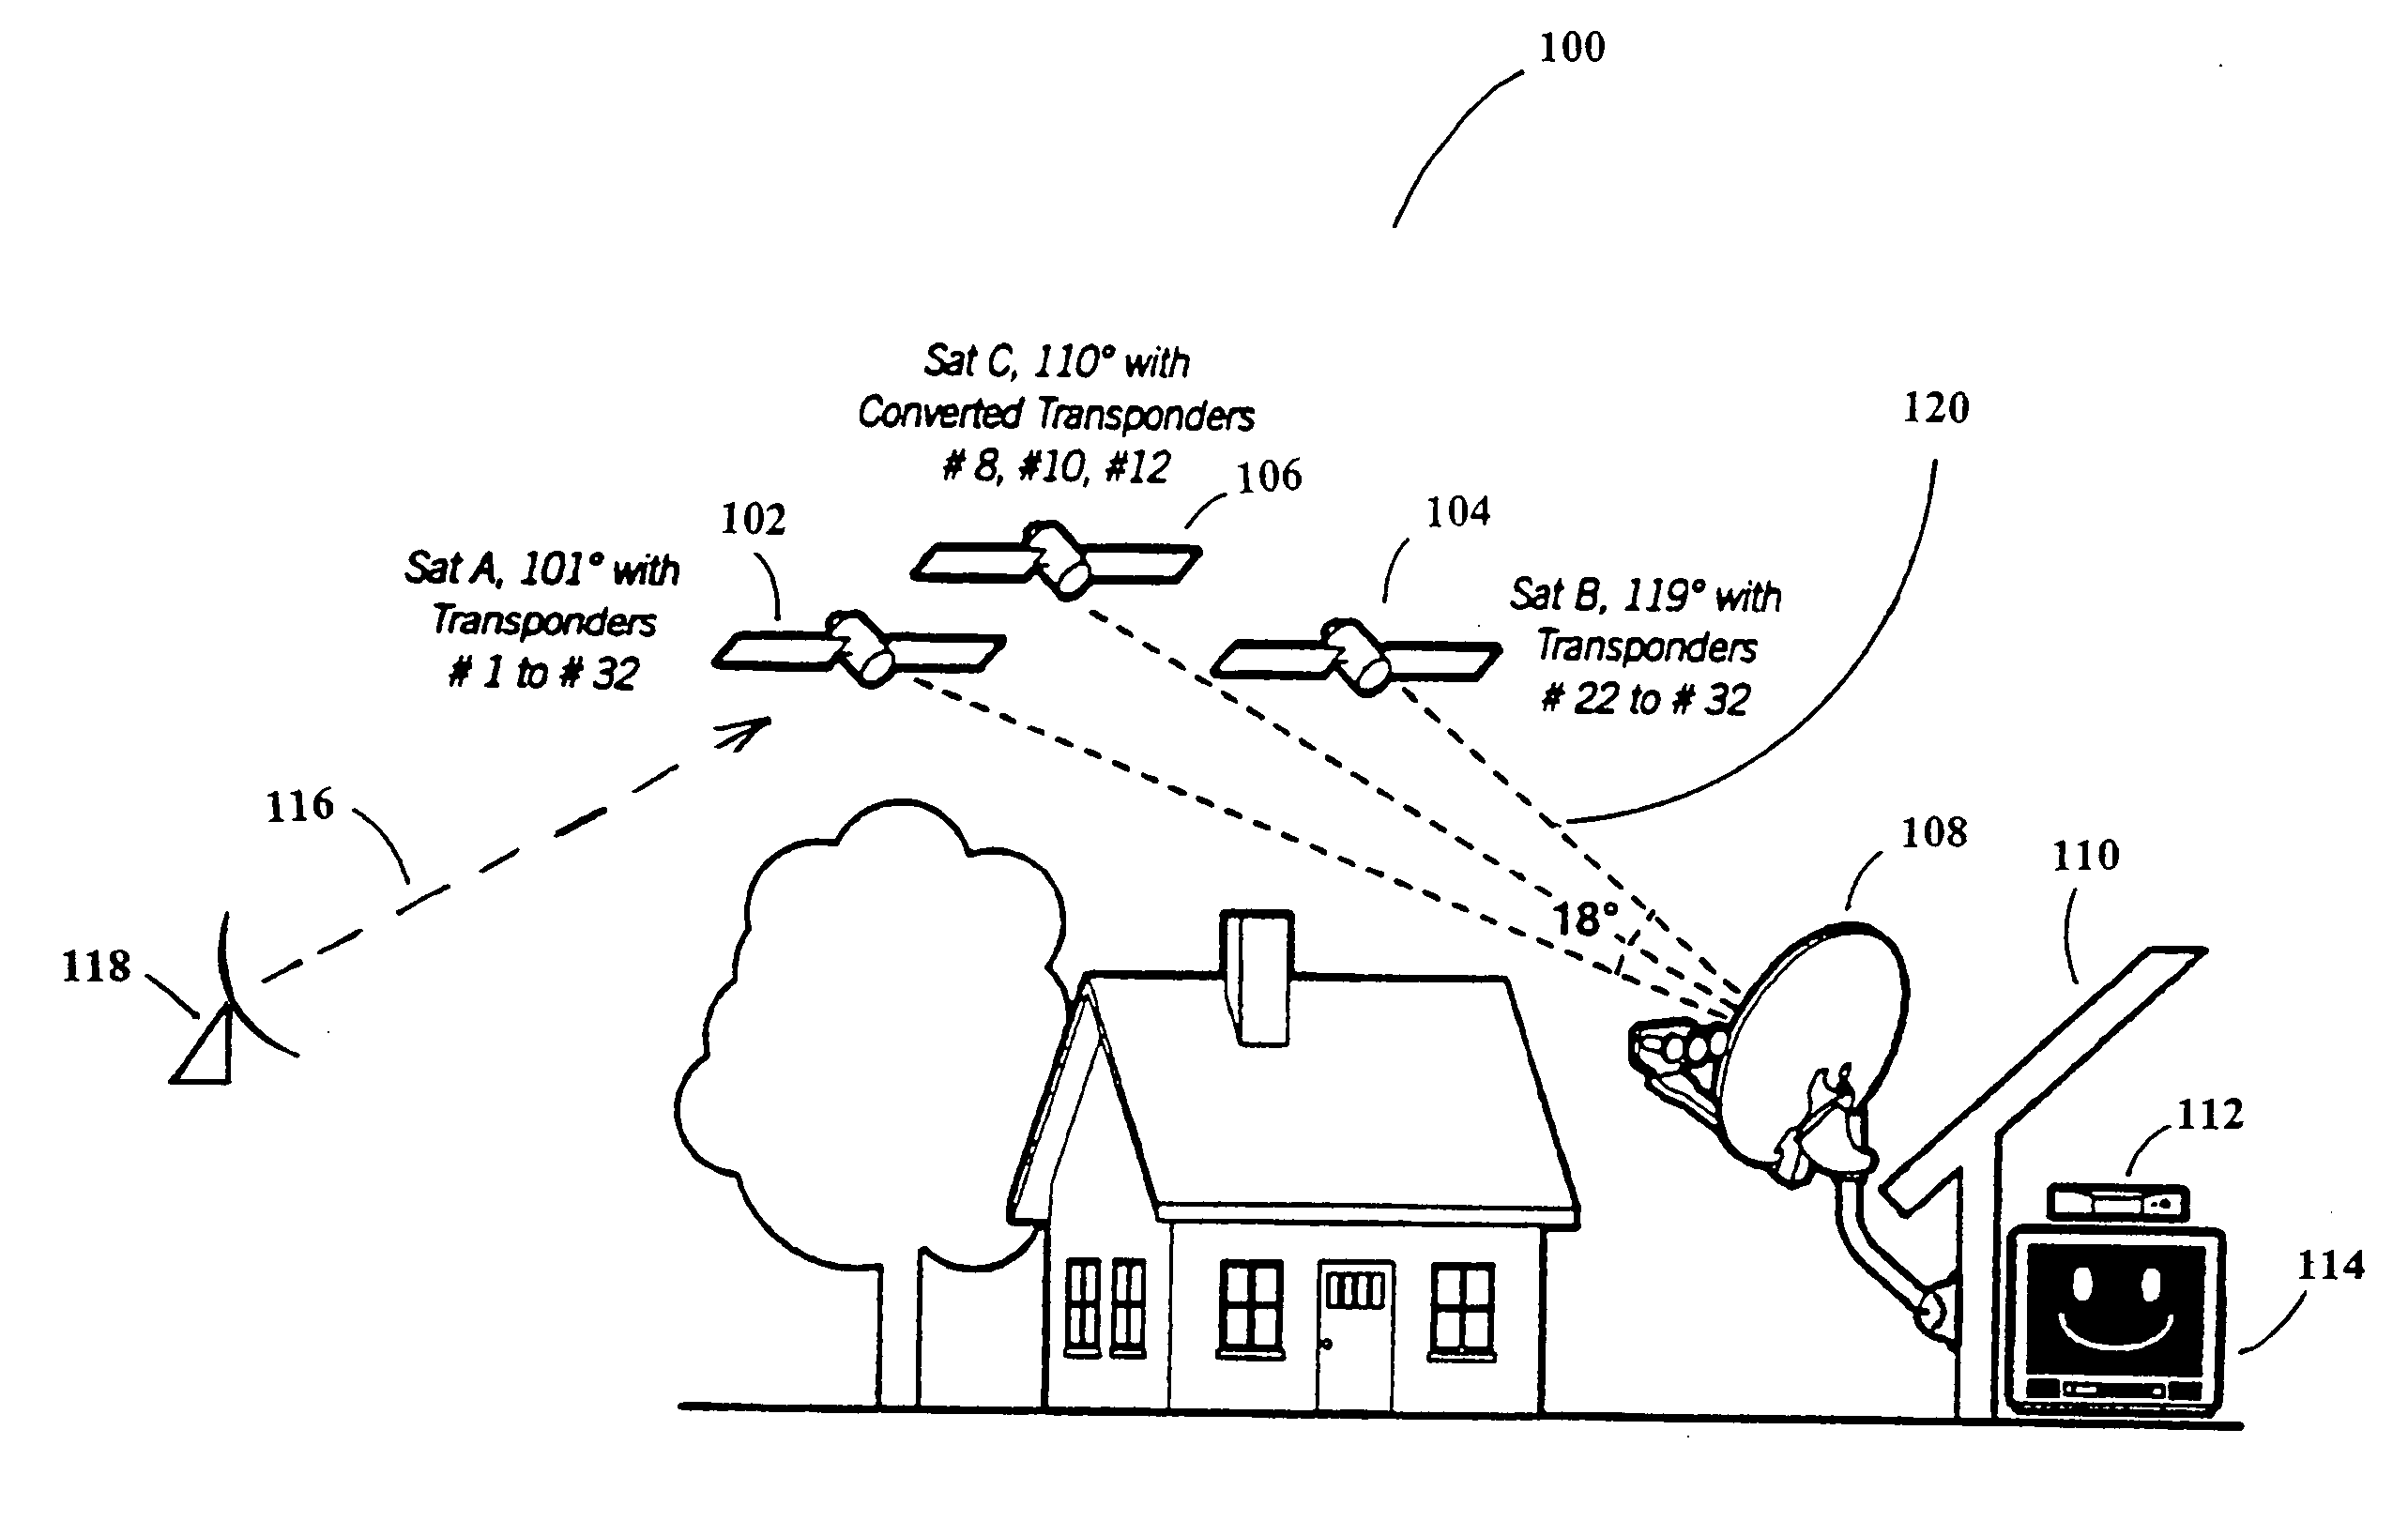 Narrow bandwidth signal delivery system